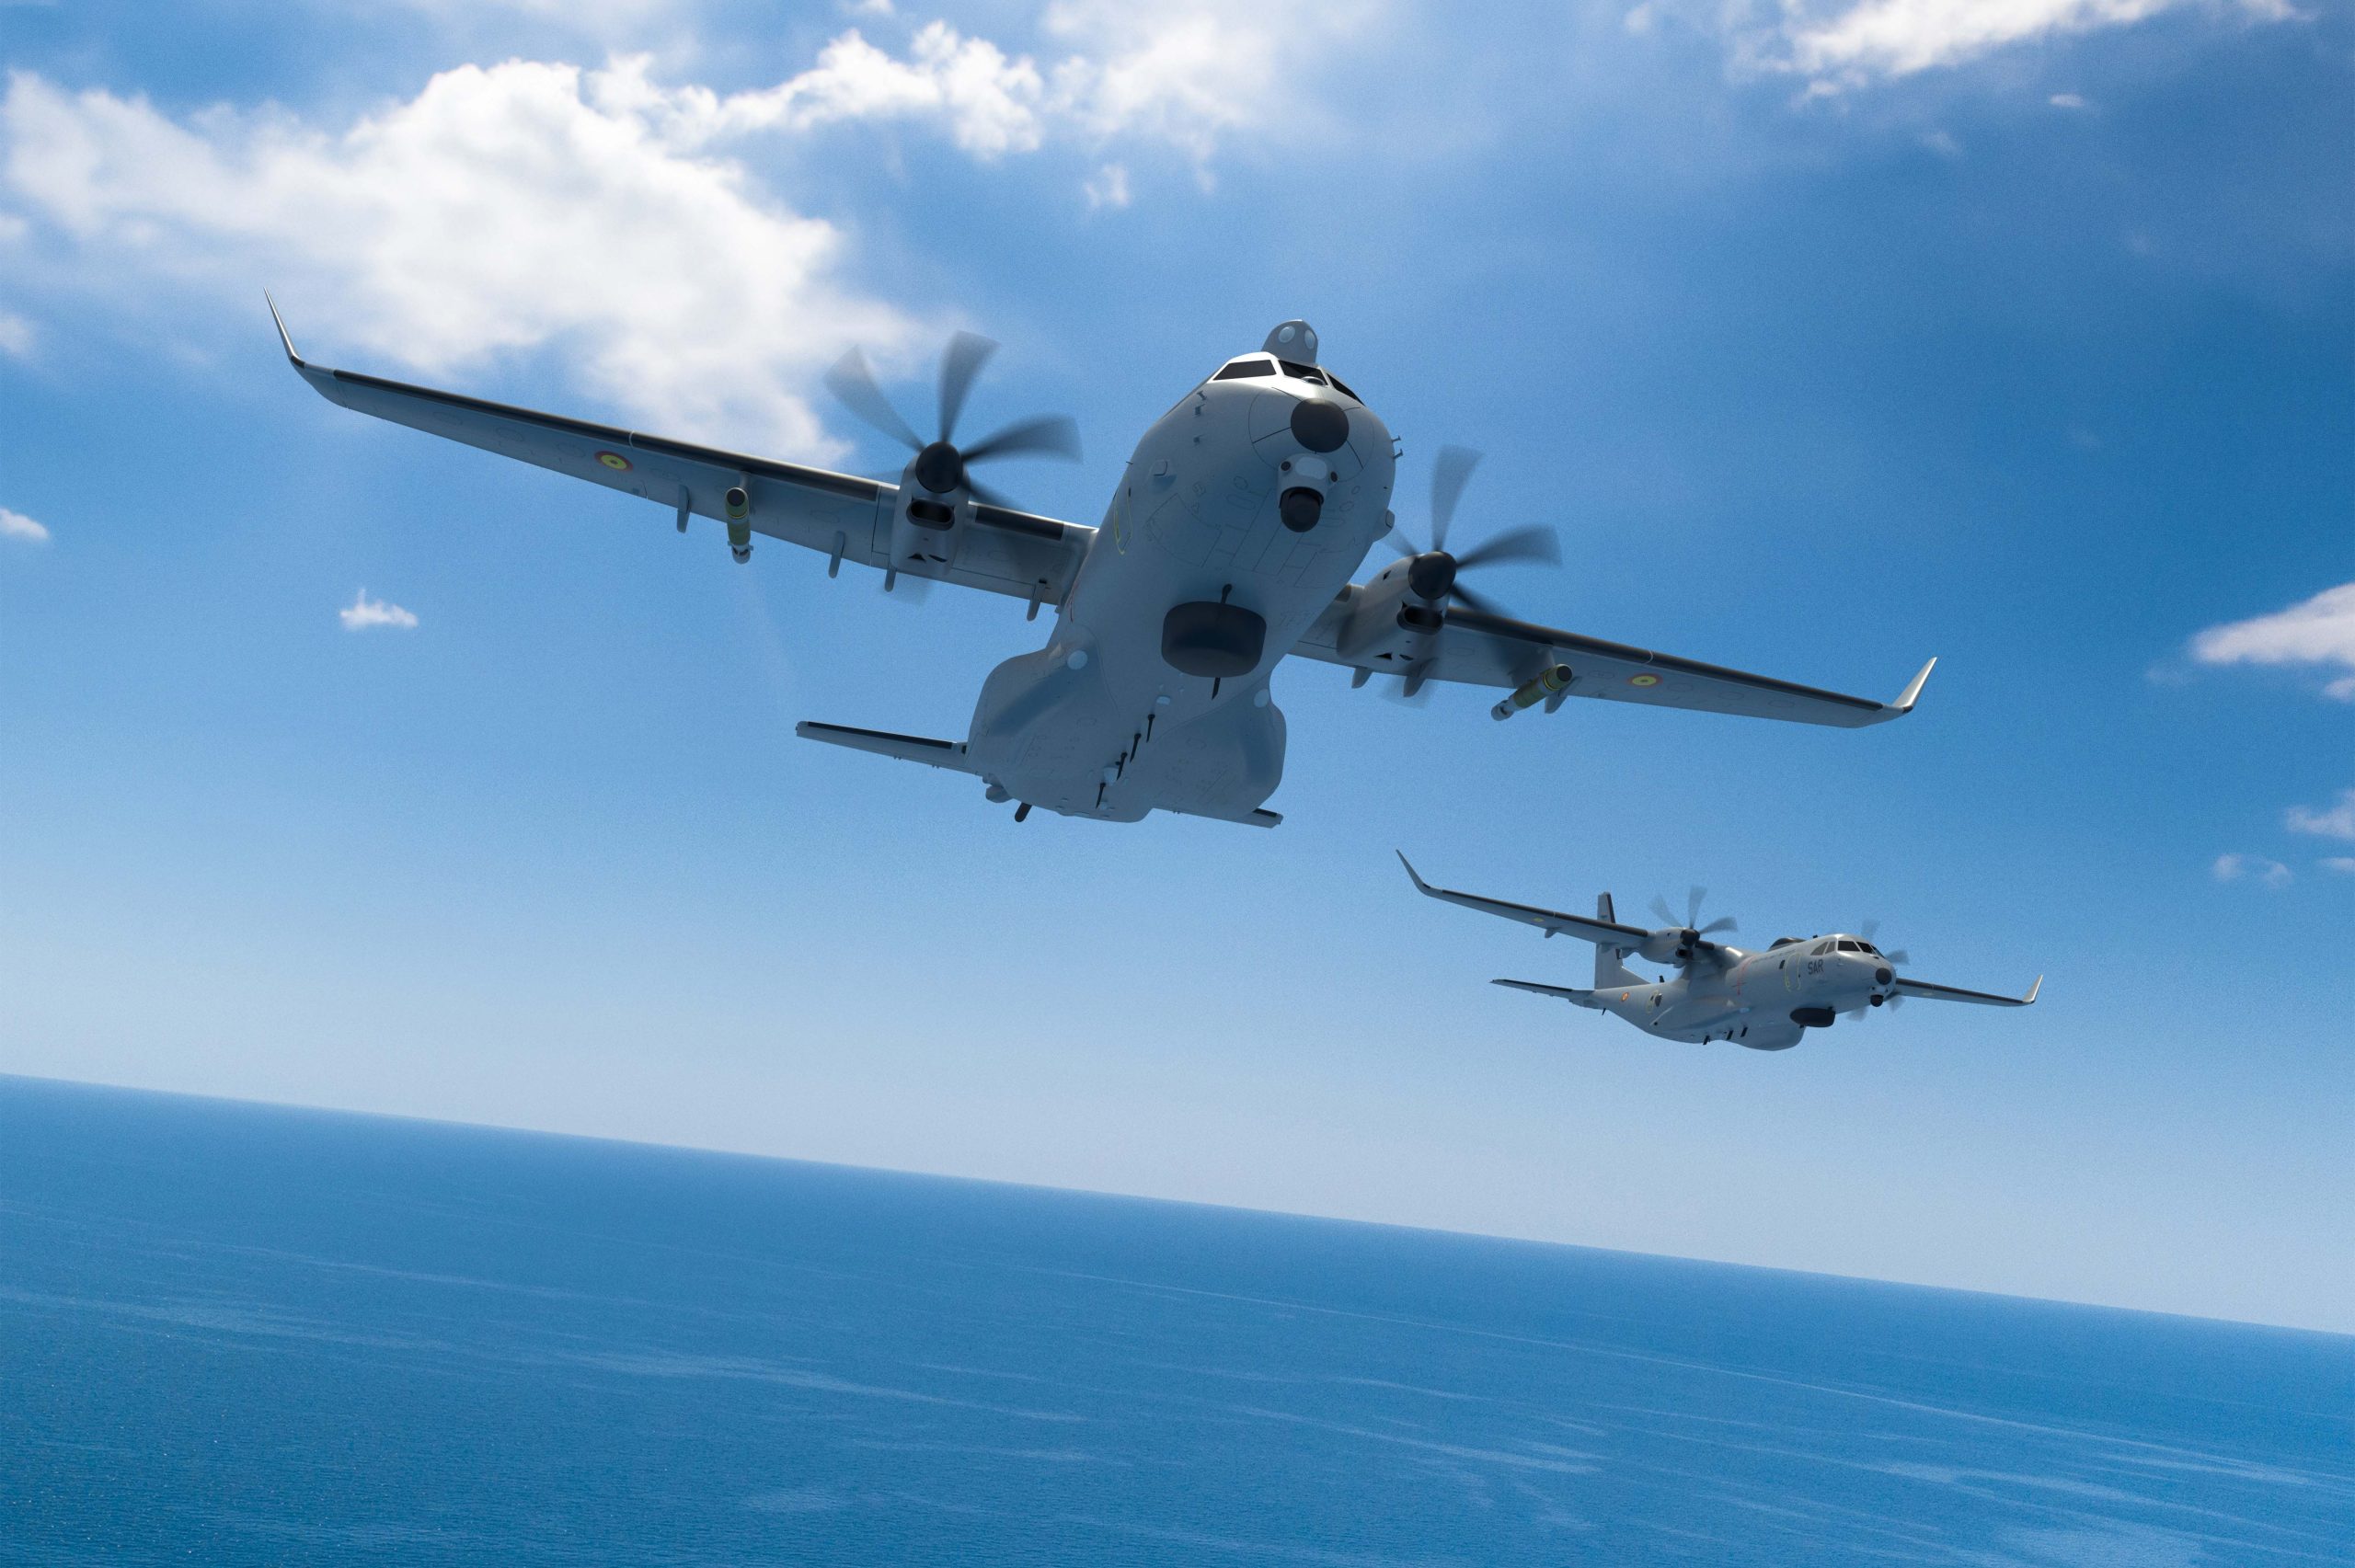 Spain Orders 16 Airbus C295 in Maritime Patrol and Surveillance Configurations